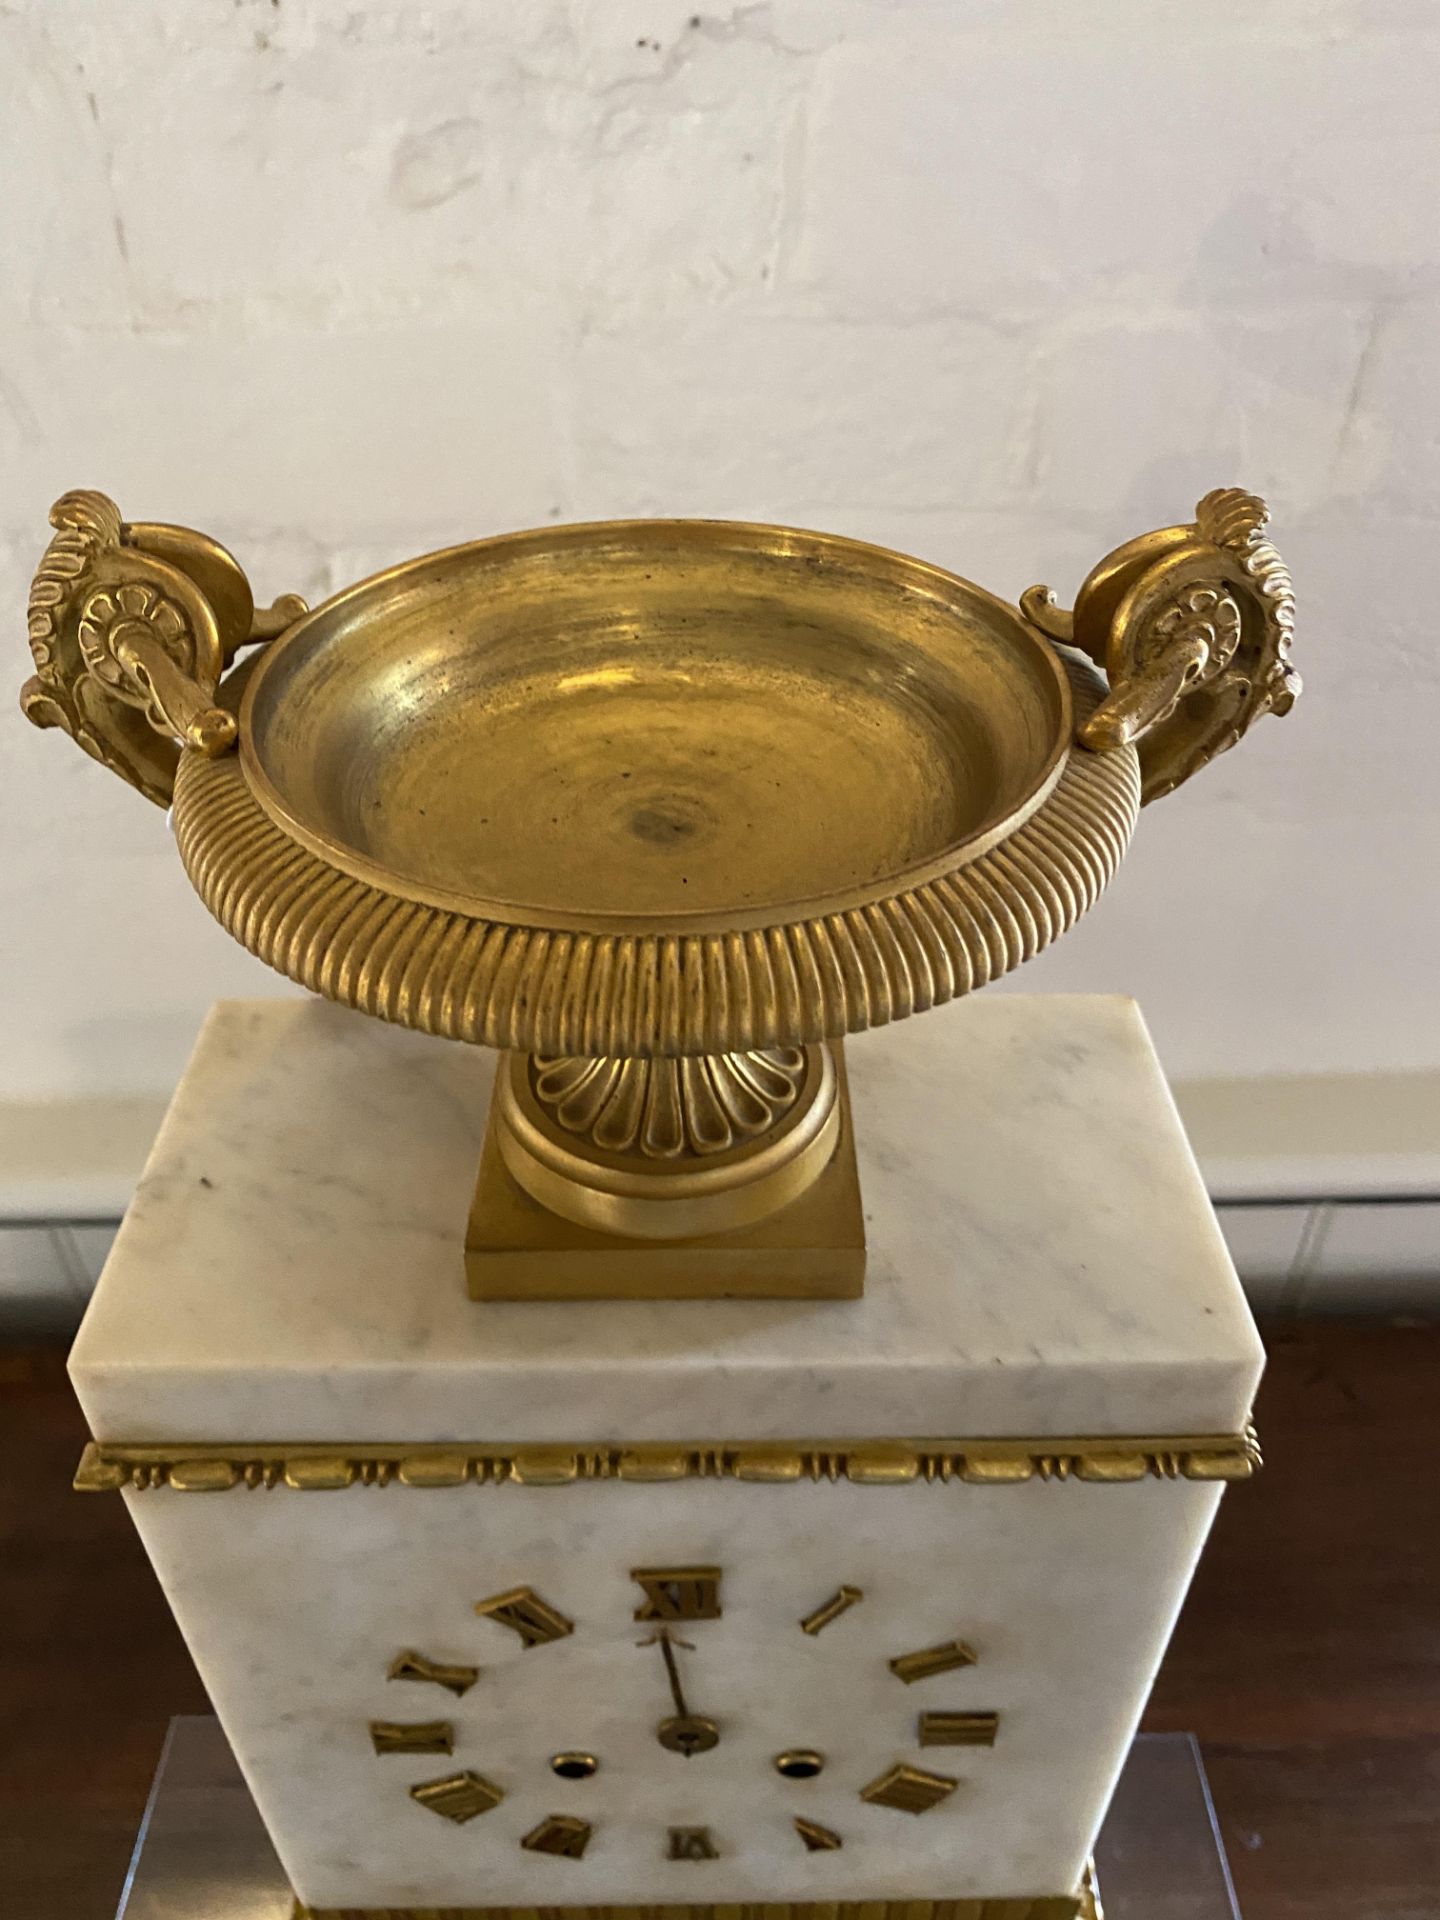 A mid 19th century French gilt bronze and white marble mantel clock - Image 5 of 8